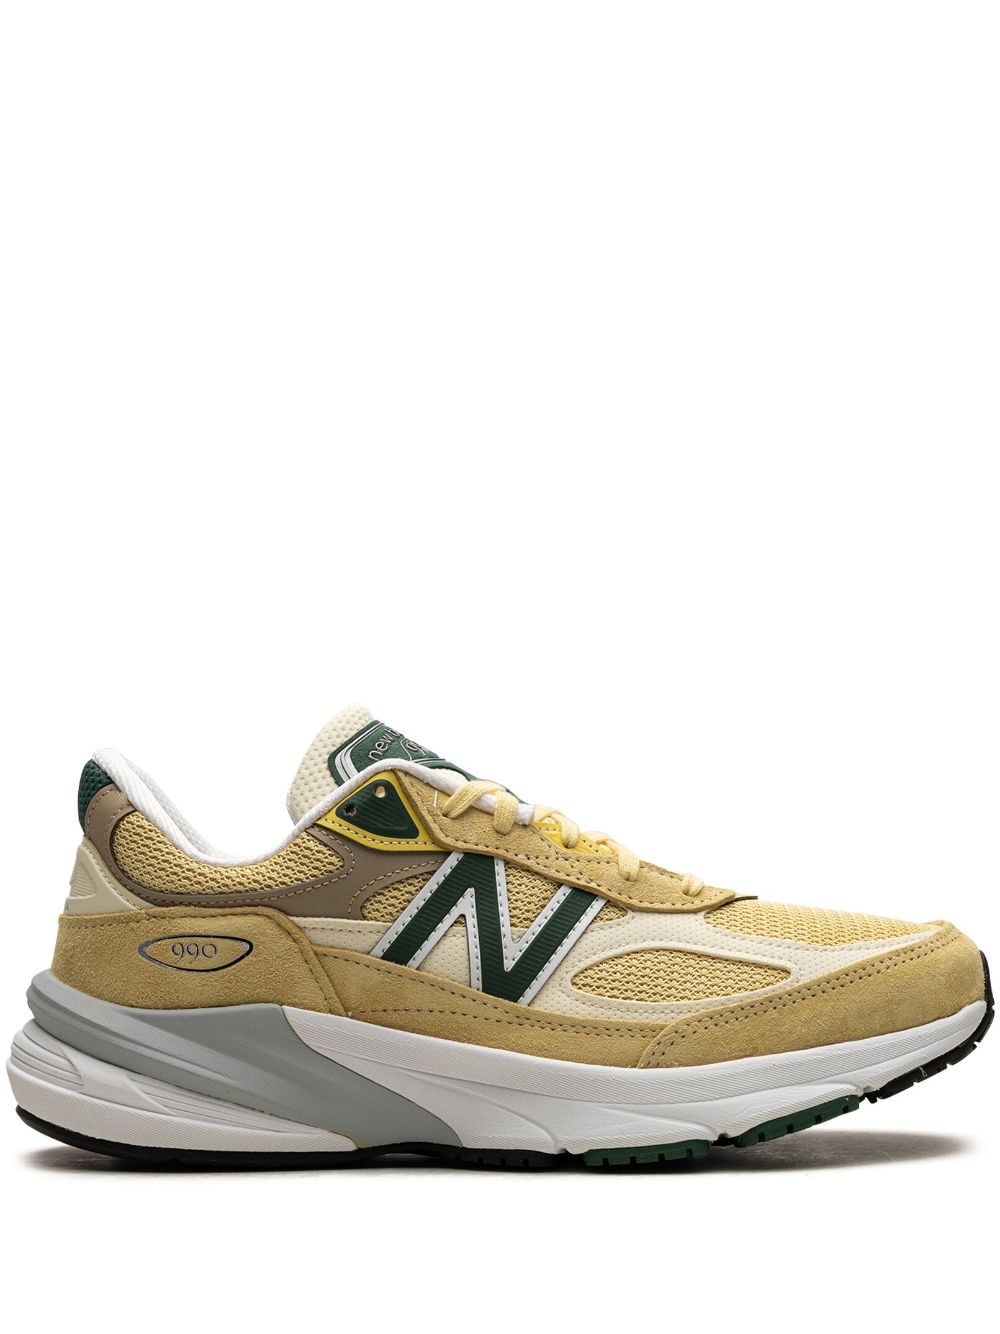 New Balance "990 ""Pale Yellow/Forest Green"" sneakers" - Geel